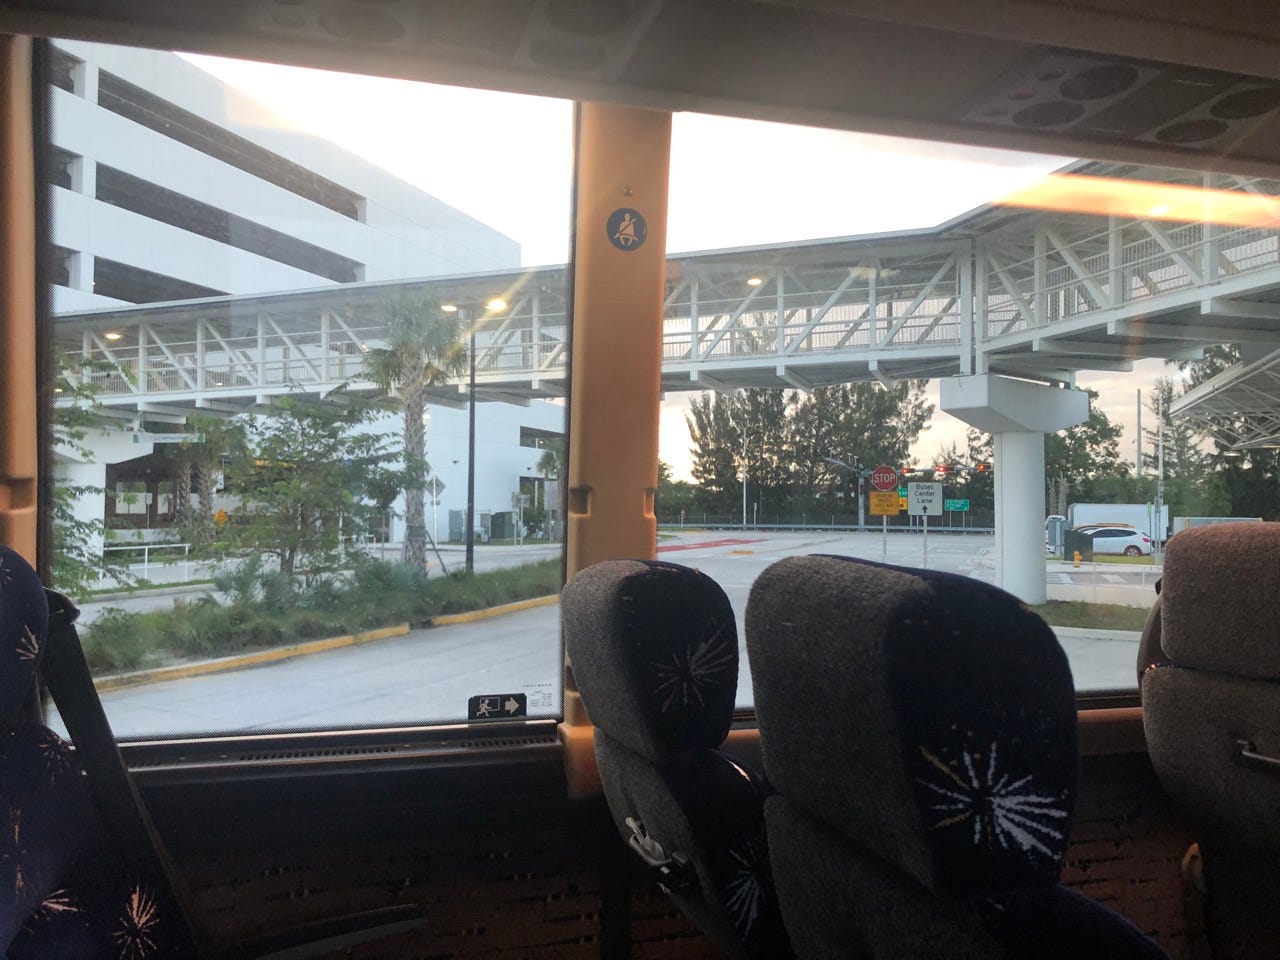 <p>I enjoyed my <a href="https://www.businessinsider.com/cheap-day-trip-florida-by-water-shuttle-naples-review-2024-2">day in Naples</a>, then headed back to the Naples bus stop to head home. </p><p>My bus was late, which wasn't a huge deal, but I wish I'd gotten more communication from FlixBus about when it would arrive. Still, once the bus did arrive, I made it back to Miami without a hitch. </p><p>Overall, I had a good experience with FlixBus and thought this was a convenient, fun way to visit Naples for the day.</p><p>Even with the surprise Lyft costs and delays on the way home, I'd totally take this ride again instead of driving.</p>